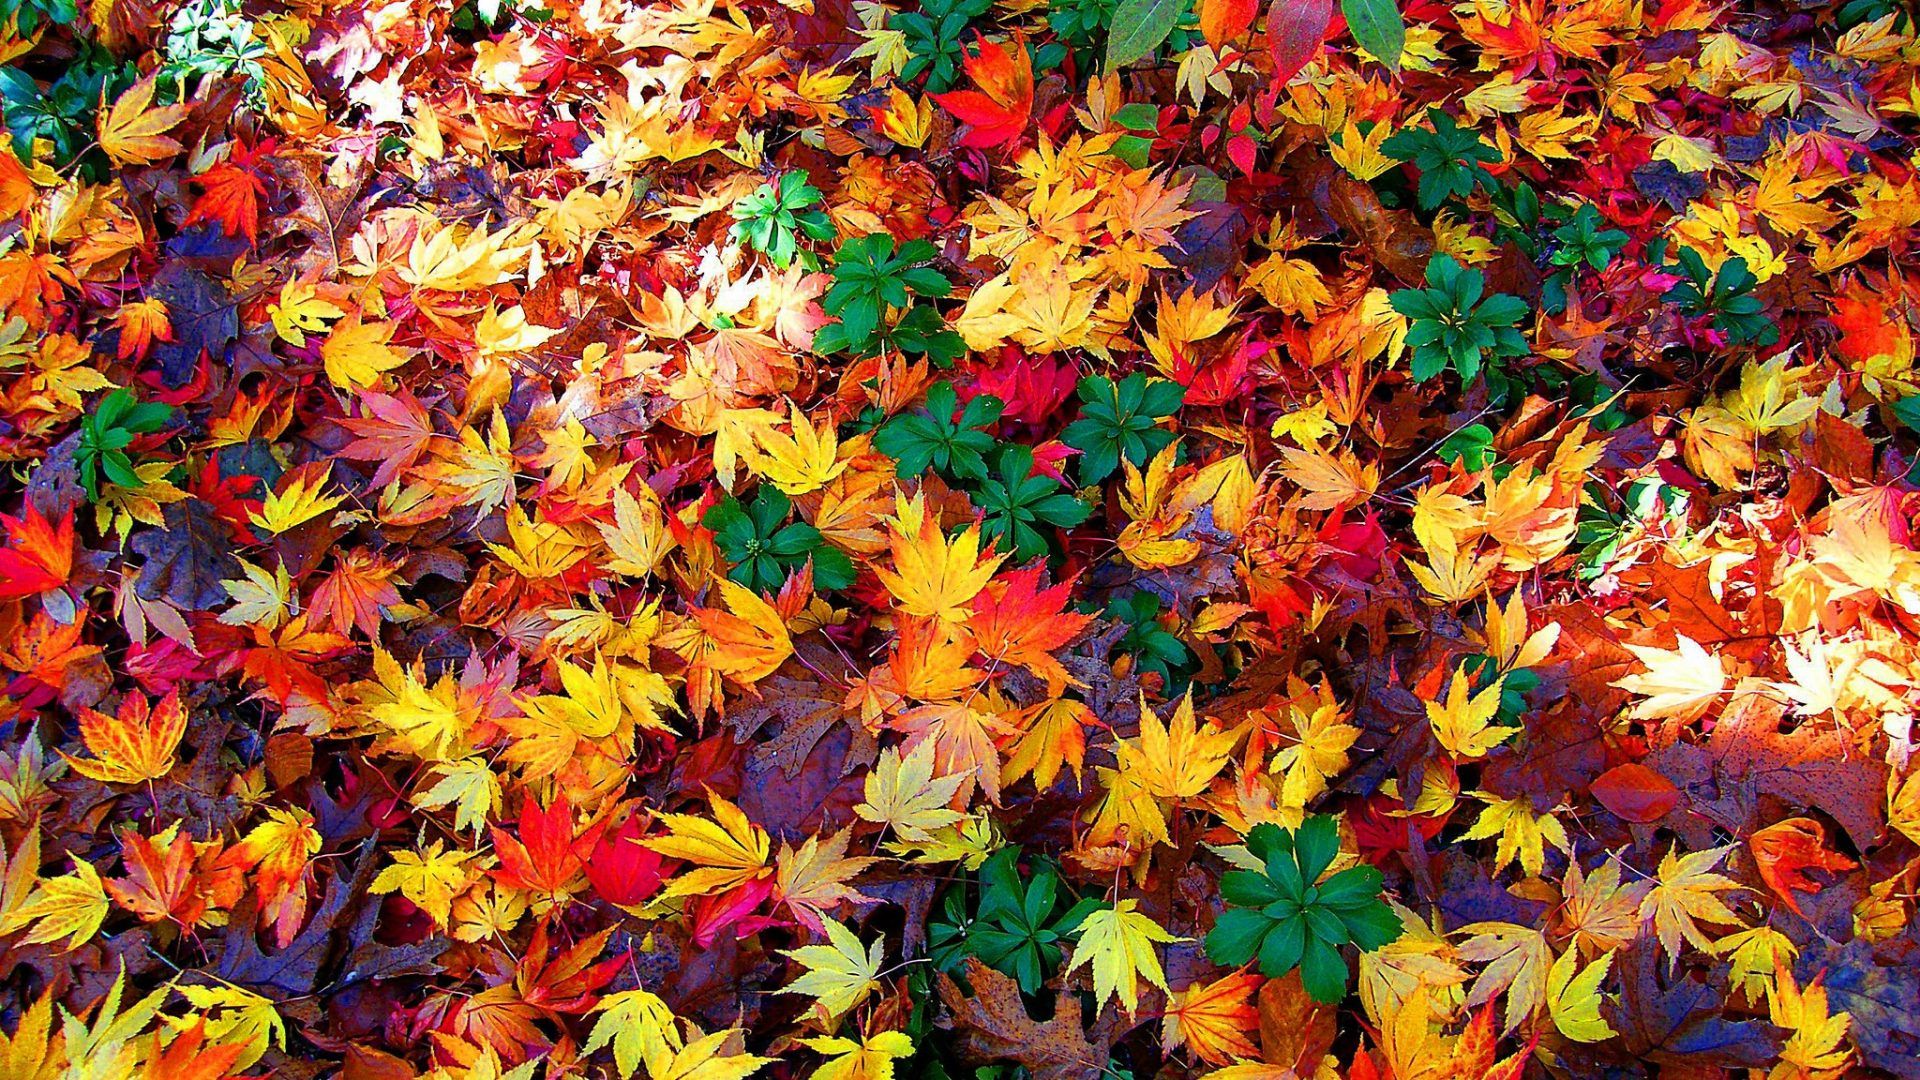 Misc Colorful Fall Leaves Autumn Wallpaper Gallery - Autumn Leaves Facebook Cover - HD Wallpaper 